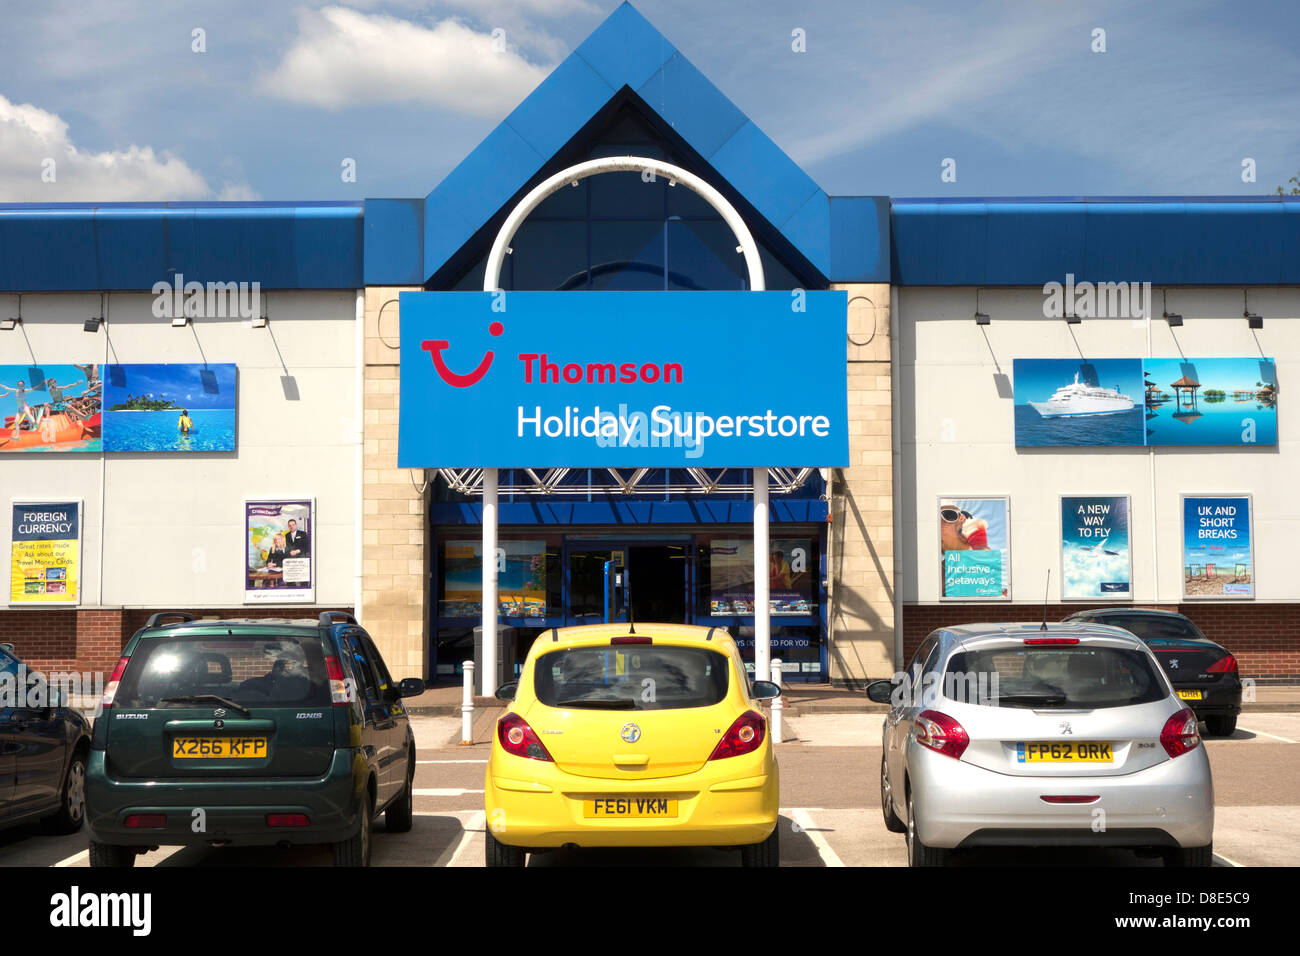 A Thomson holiday superstore on a retail park in Nottingham, England, U.K. Stock Photo